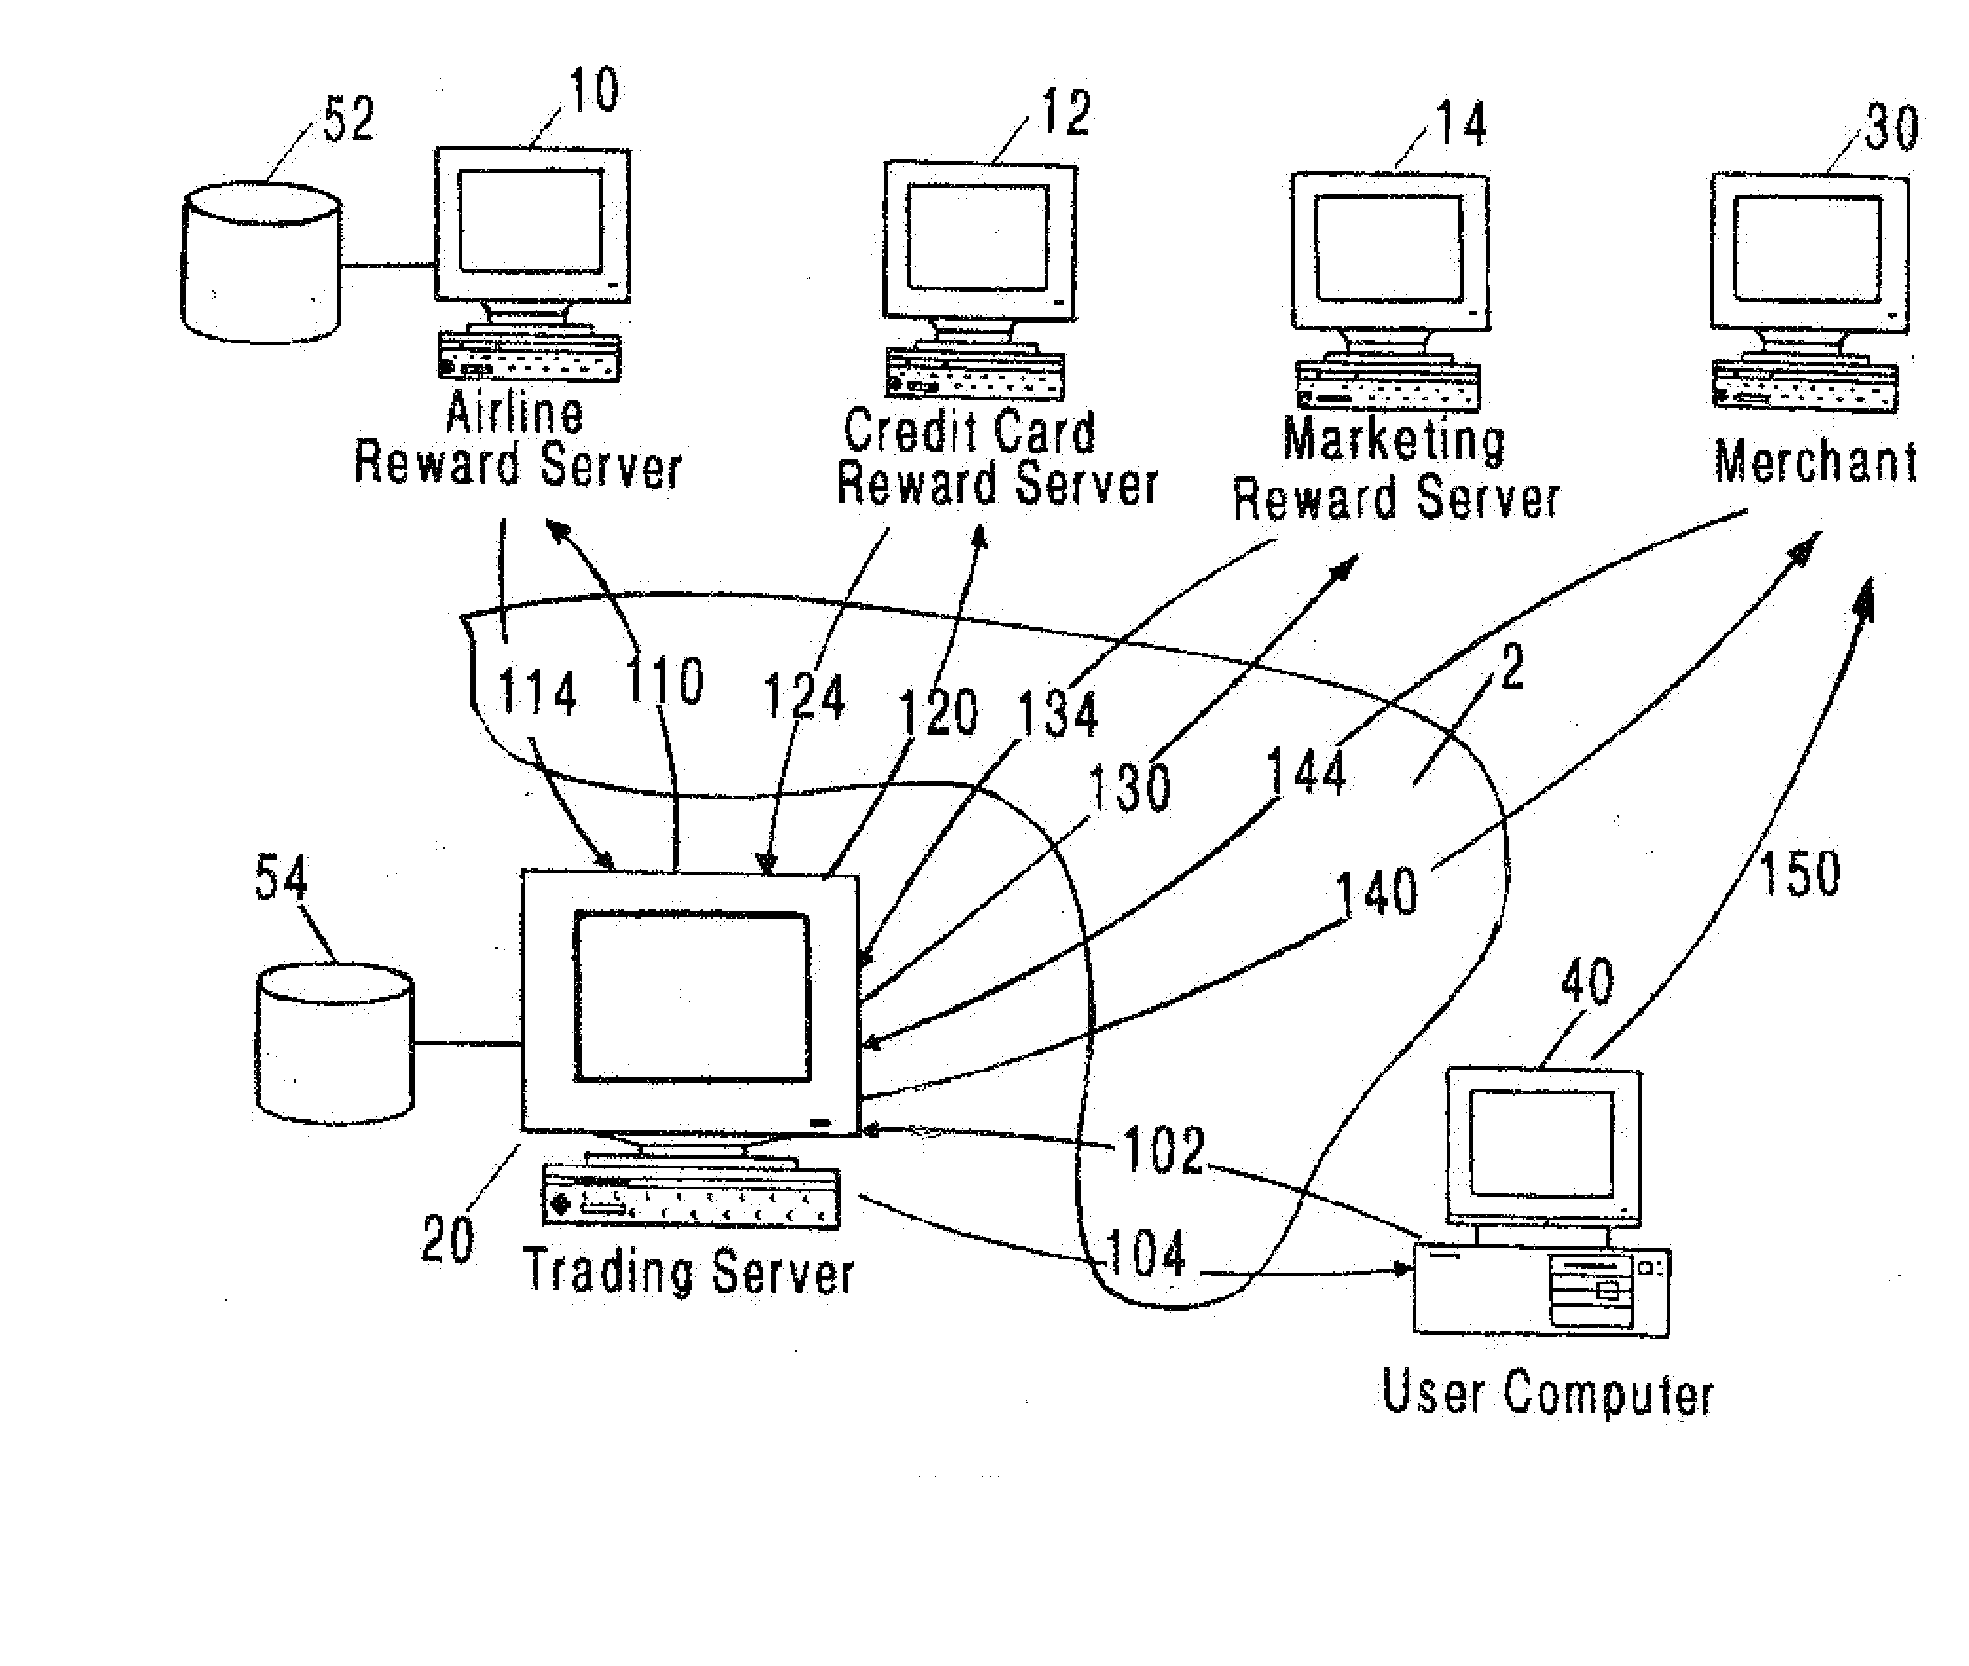 Broadcast television reward program and method of use for issuing, aggregating and redeeming sponsor's reward points